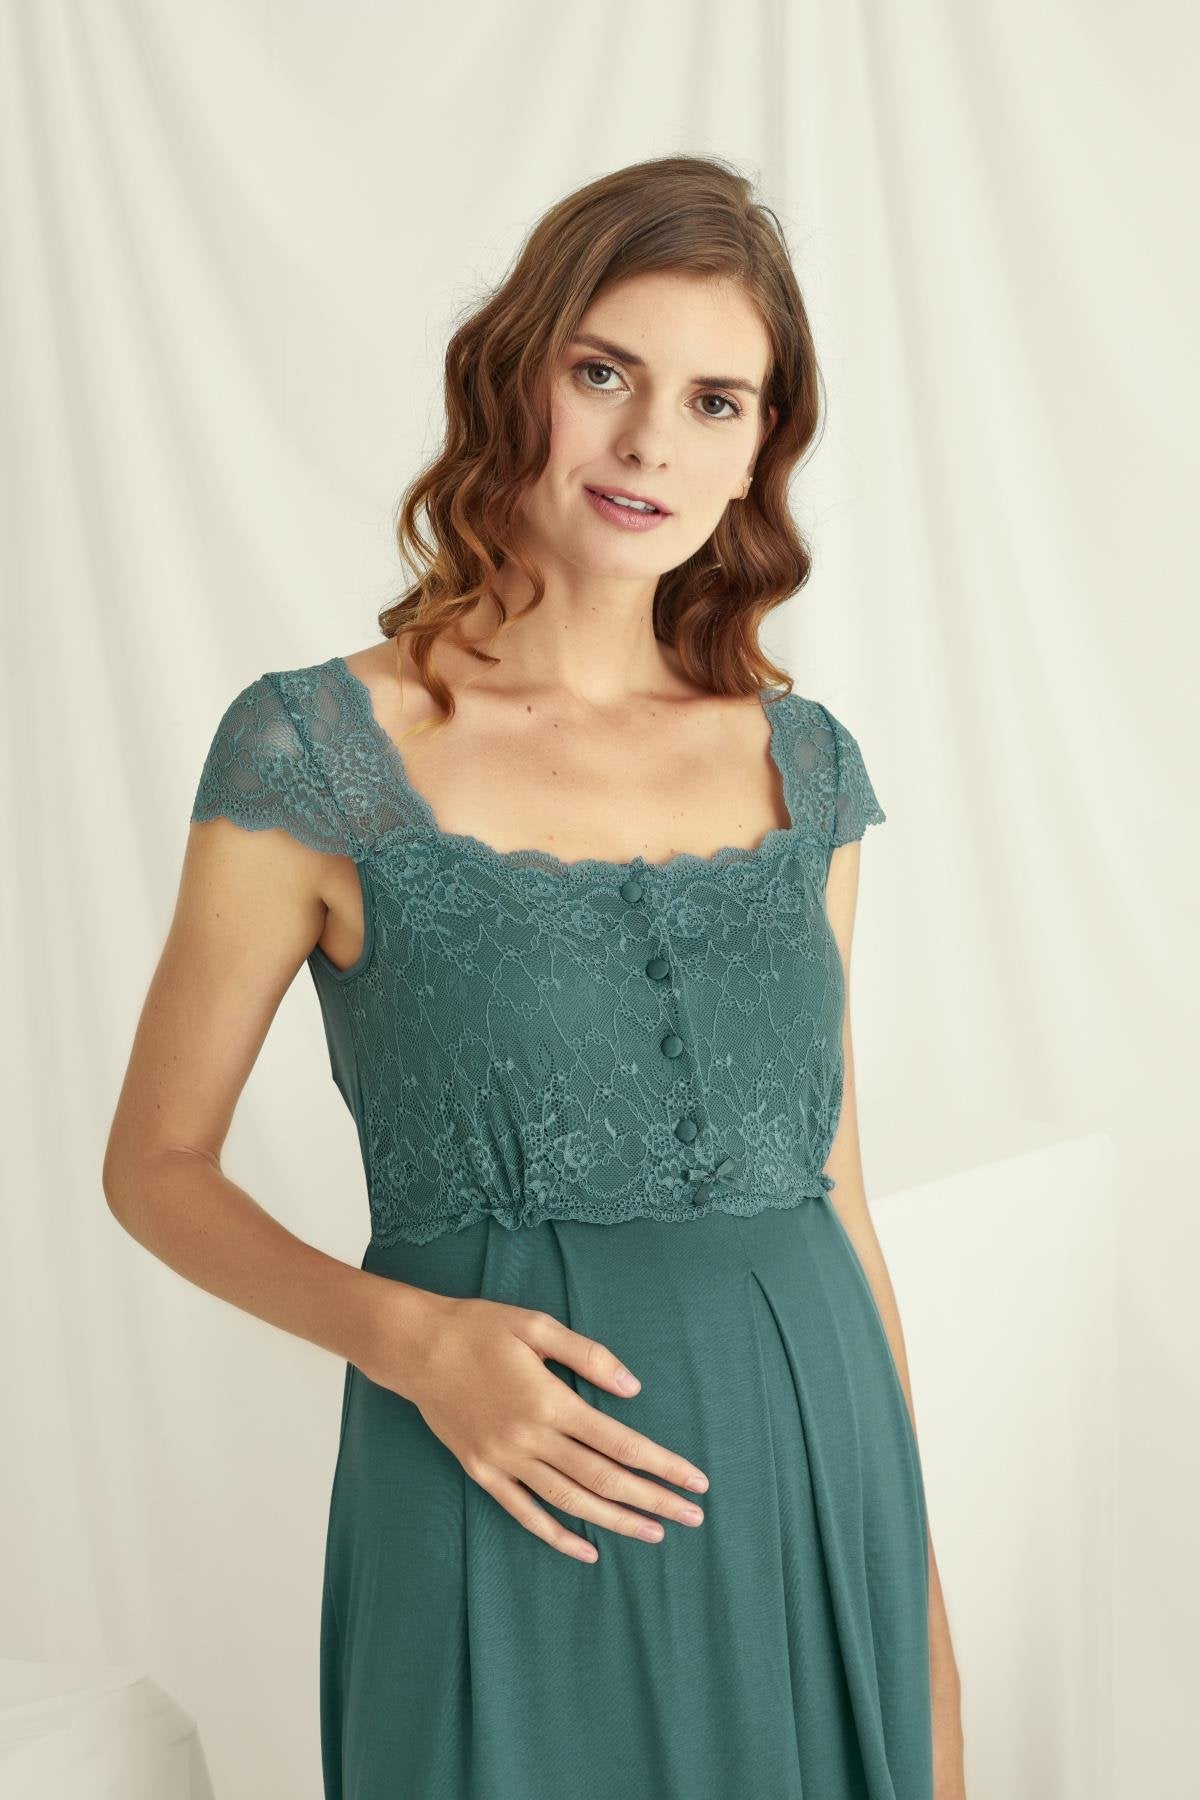 Shopymommy 18536 Lace Maternity & Nursing Nightgown Green